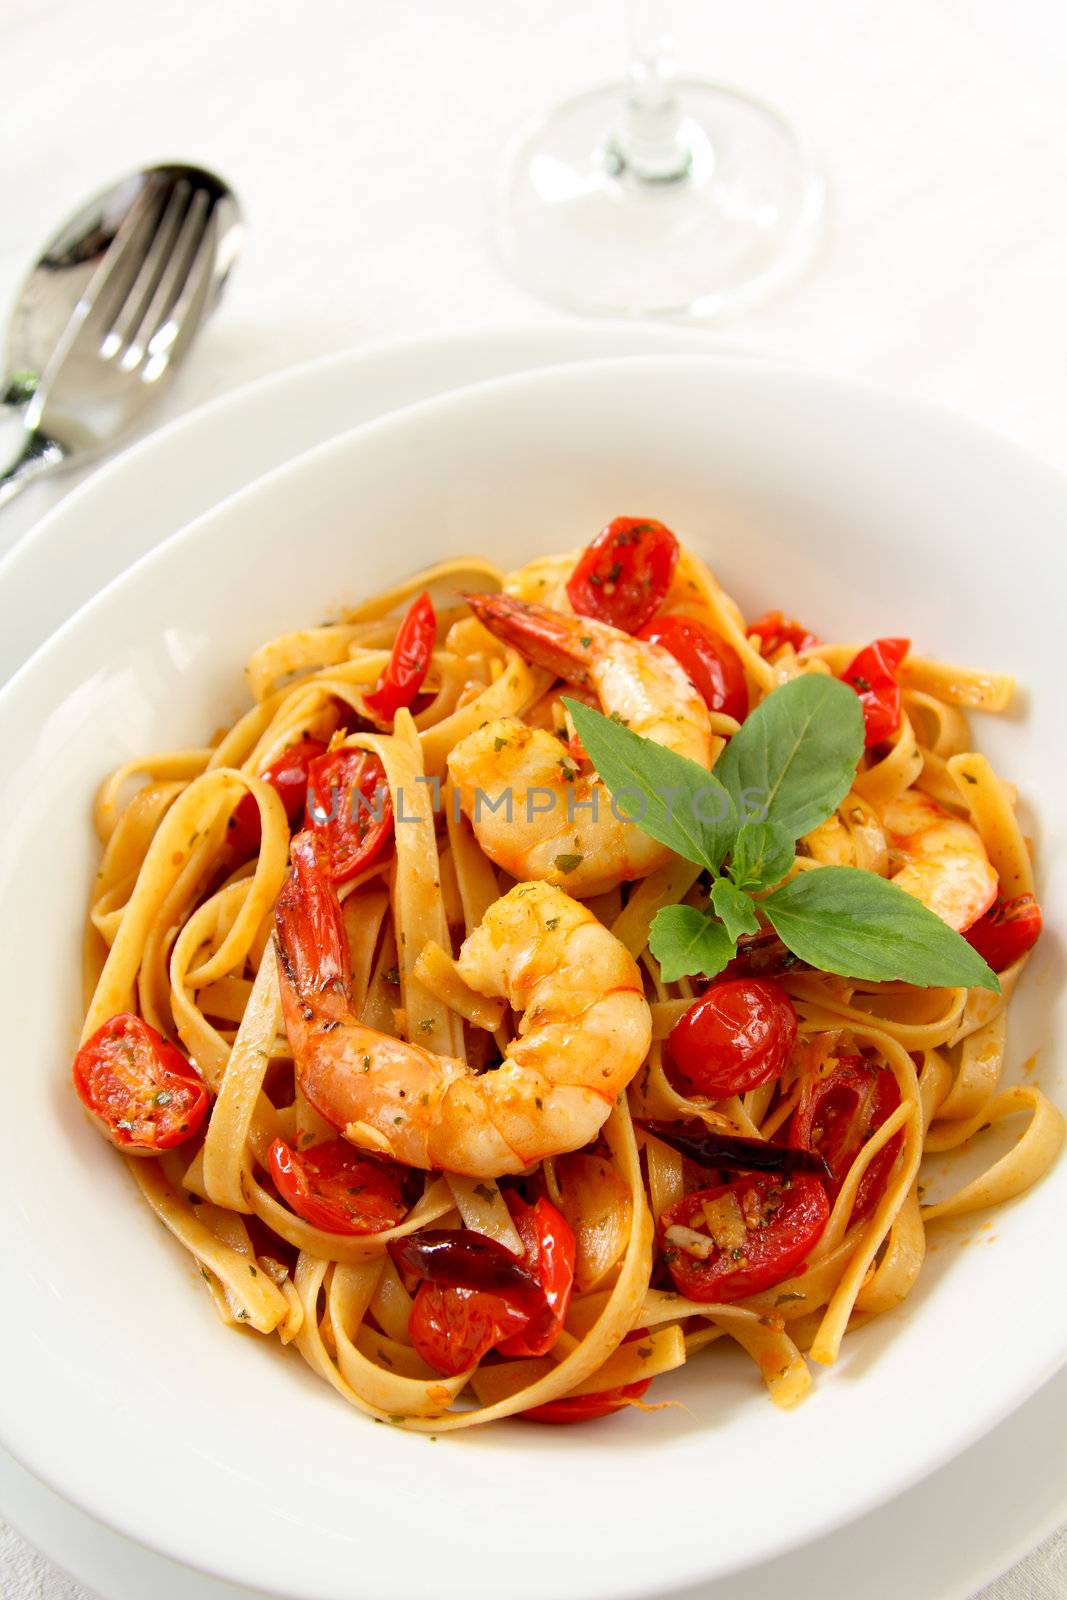 Fettuccine with prawn in tomato sauce by vanillaechoes